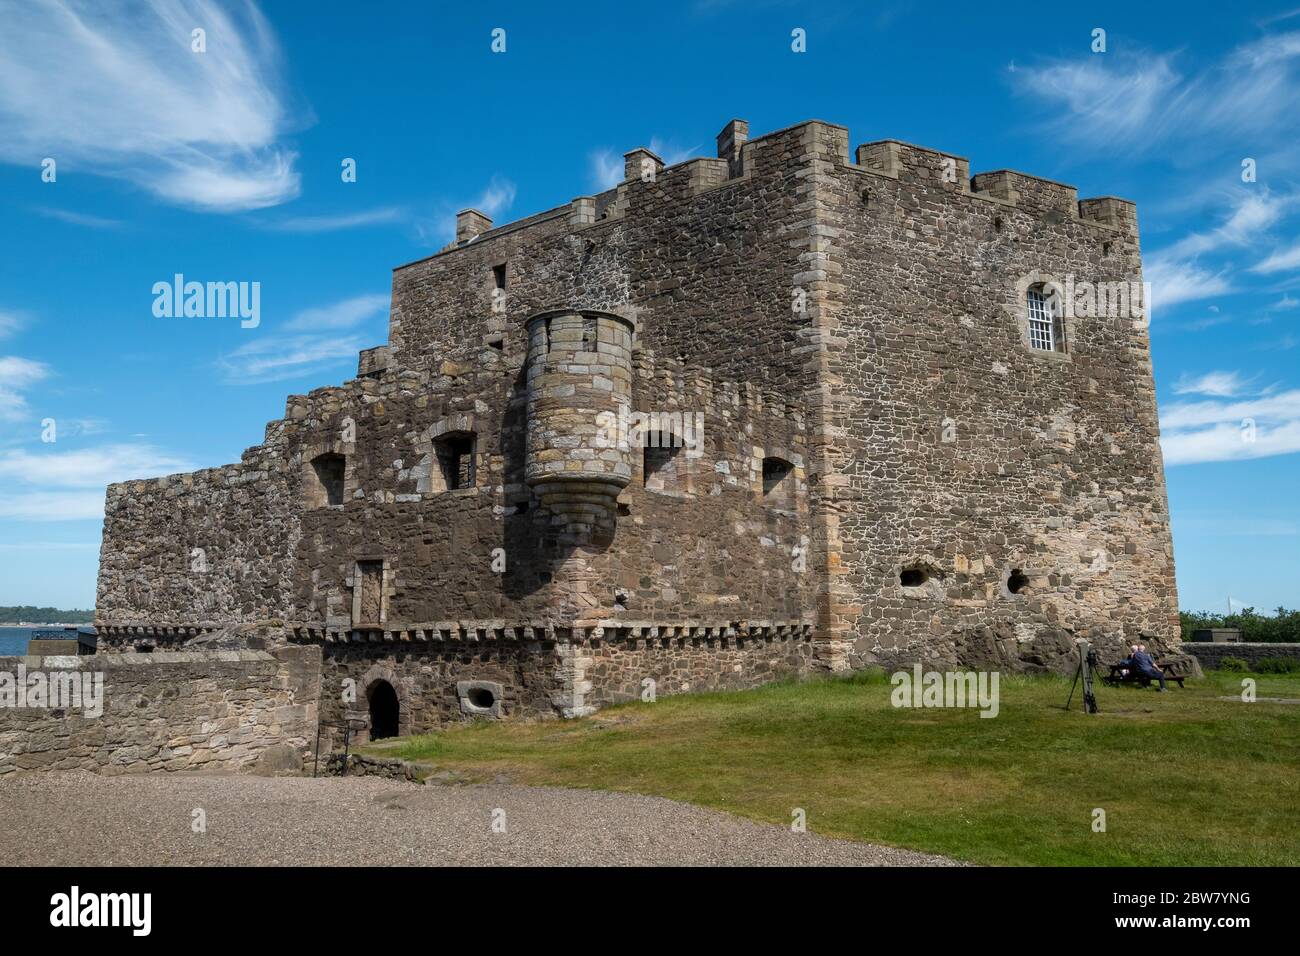 Blackness castle on the shores of the Firth of Forth, West Lothain. It has been used as a film location and most recently in the Outlander TV series. Stock Photo